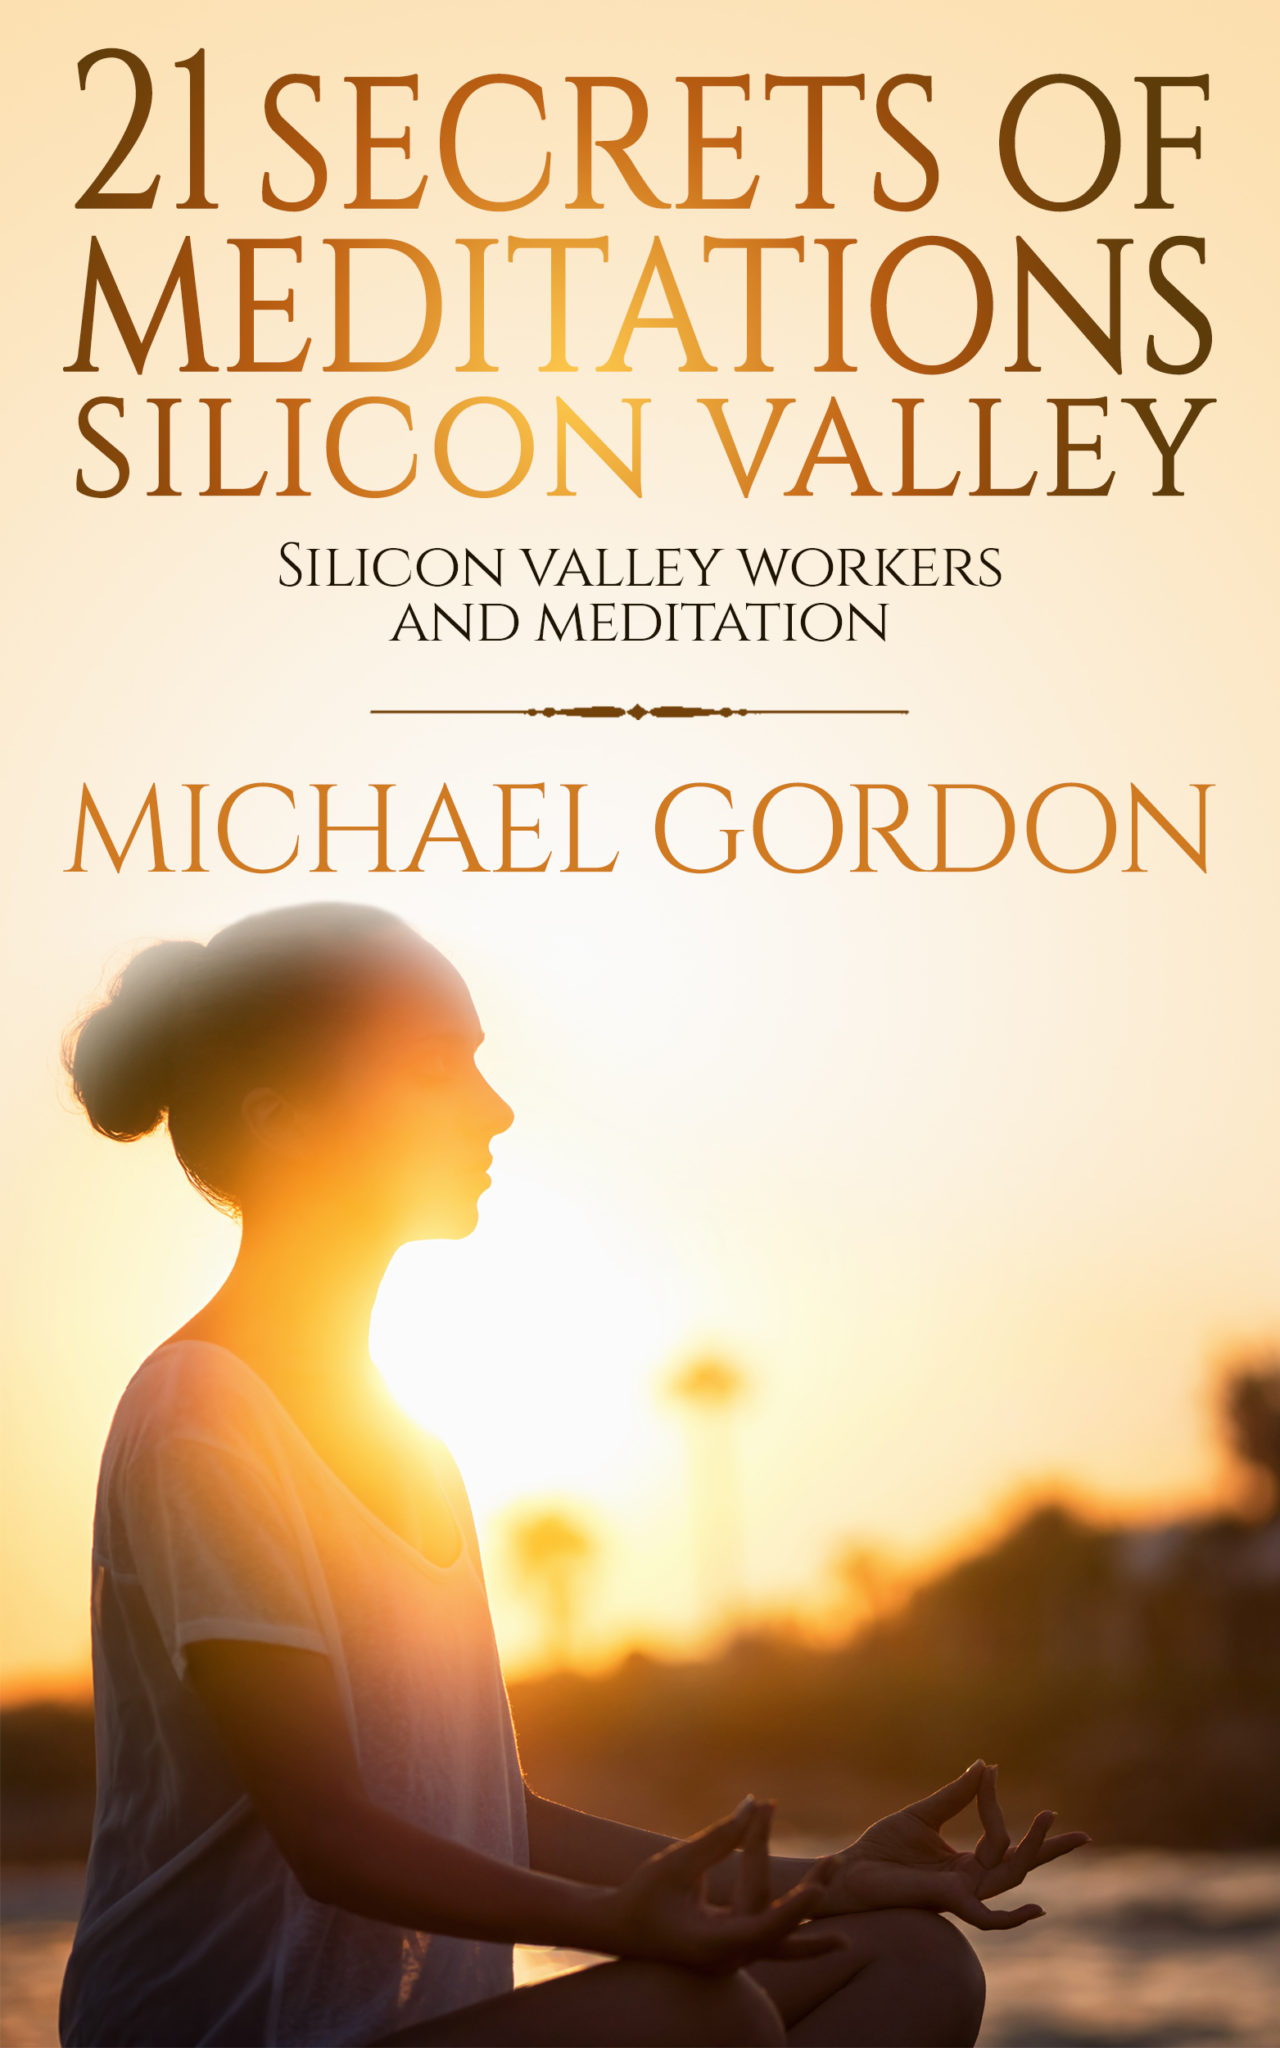 FREE: 21 secrets of meditation in silicon valley by Michael Gordon